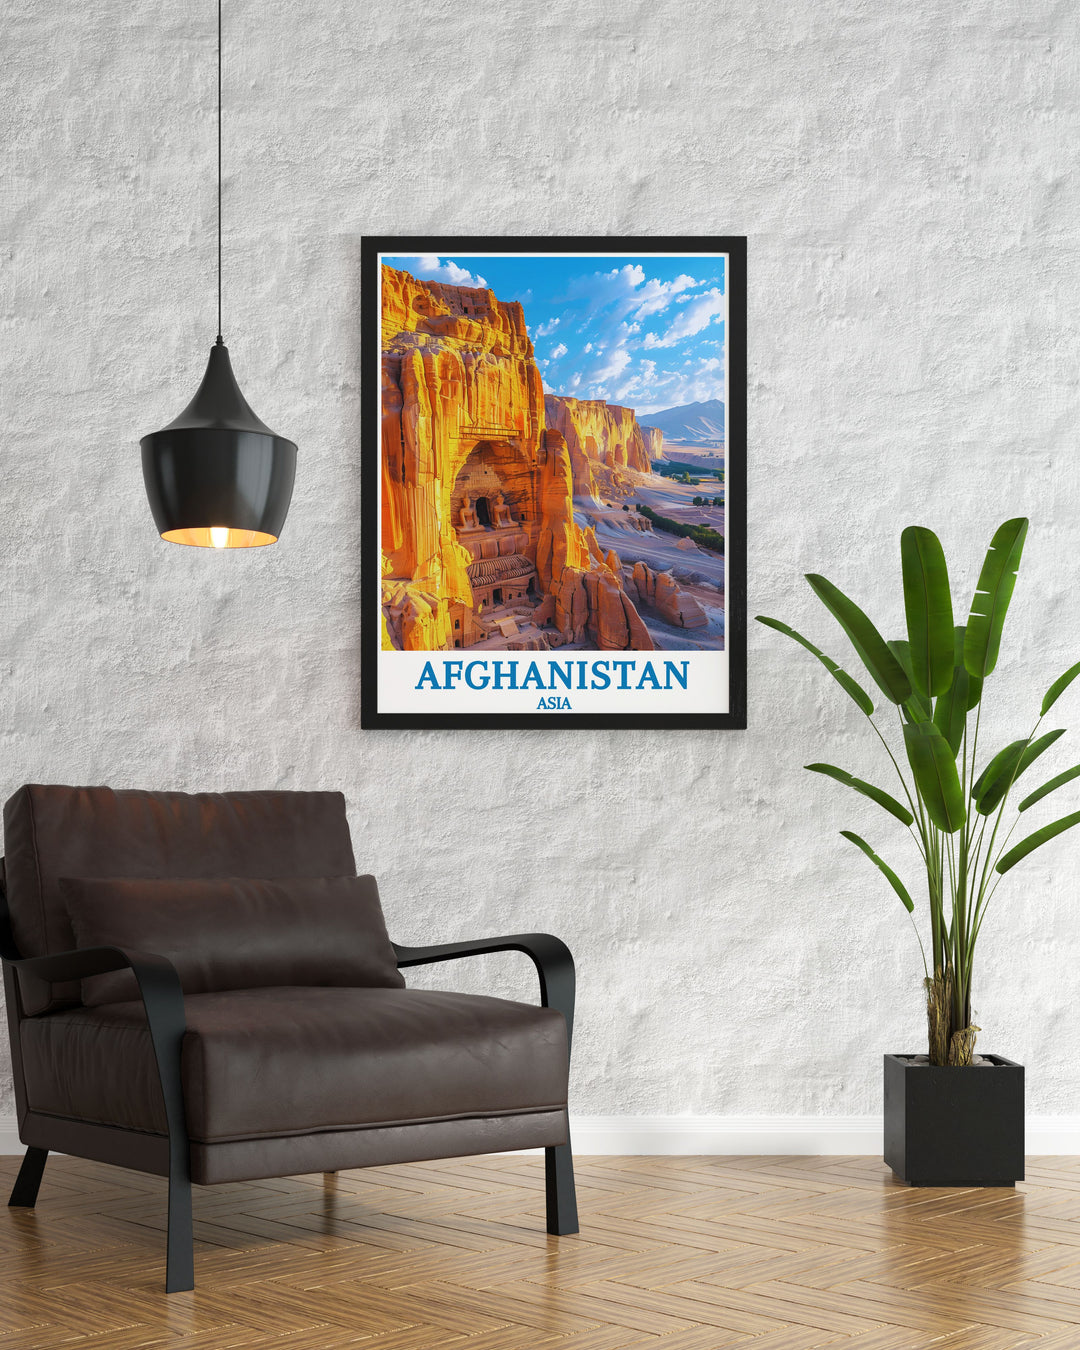 The Bamiyan Buddha Statues in a vibrant Afghanistan Print showcasing intricate details and rich cultural heritage perfect for home decor or gifting options including birthday gifts Christmas gifts and Mothers Day gifts